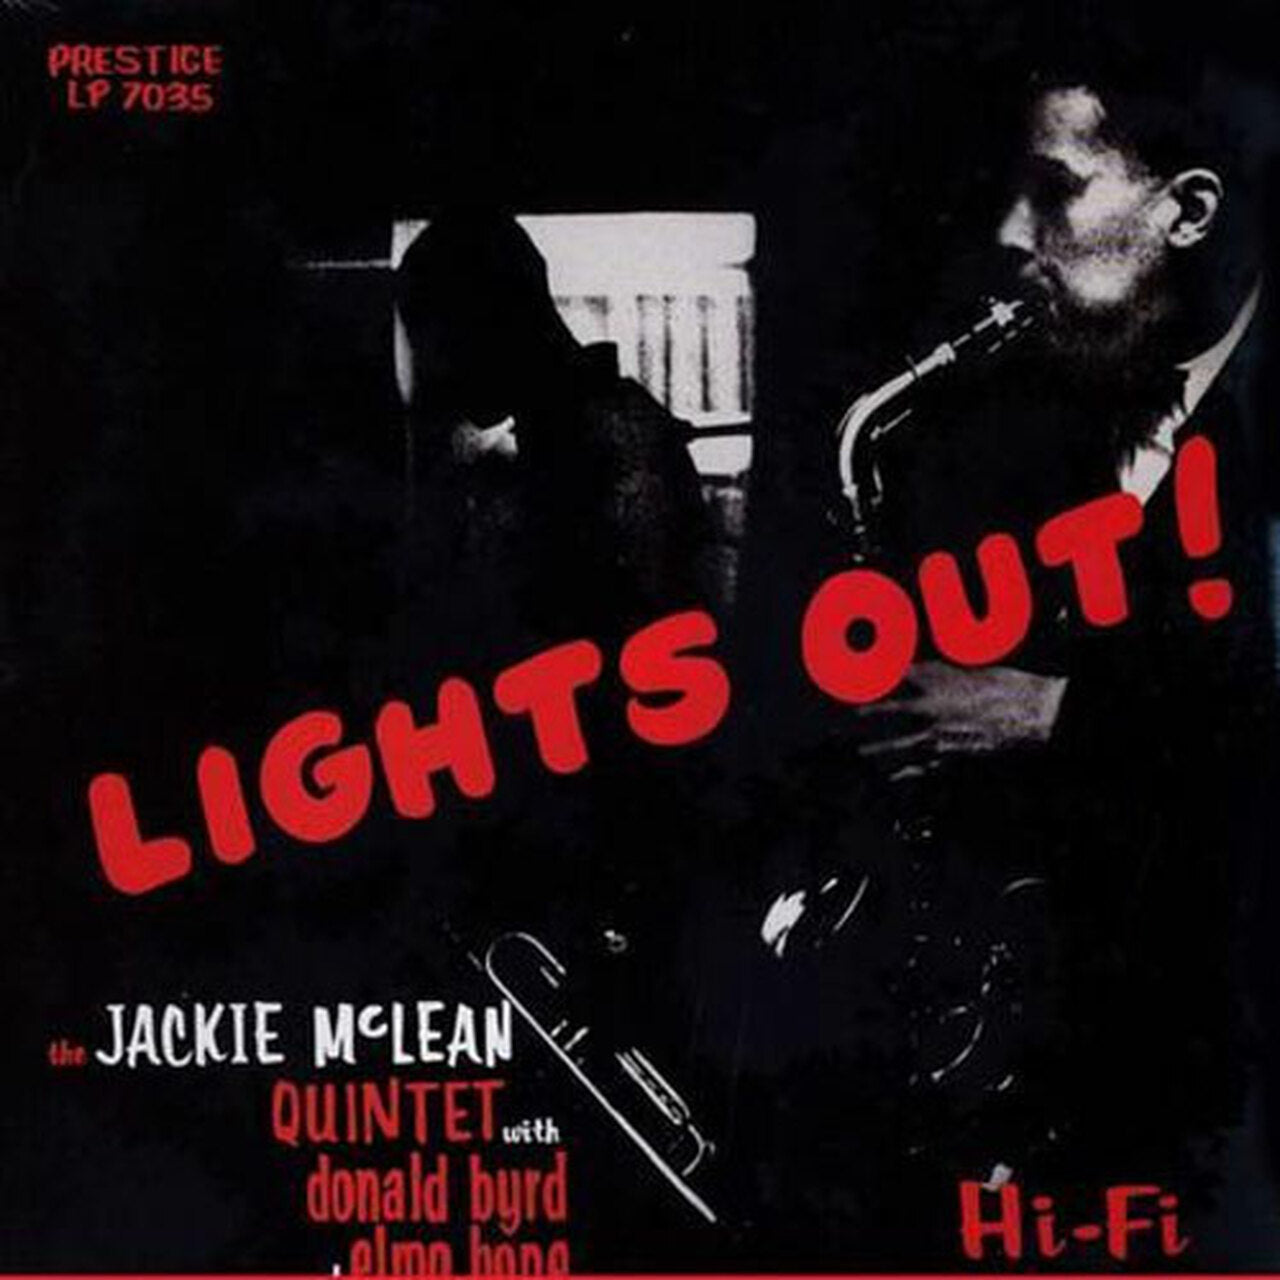 Jackie McLean - Lights Out! - Analogue Productions LP